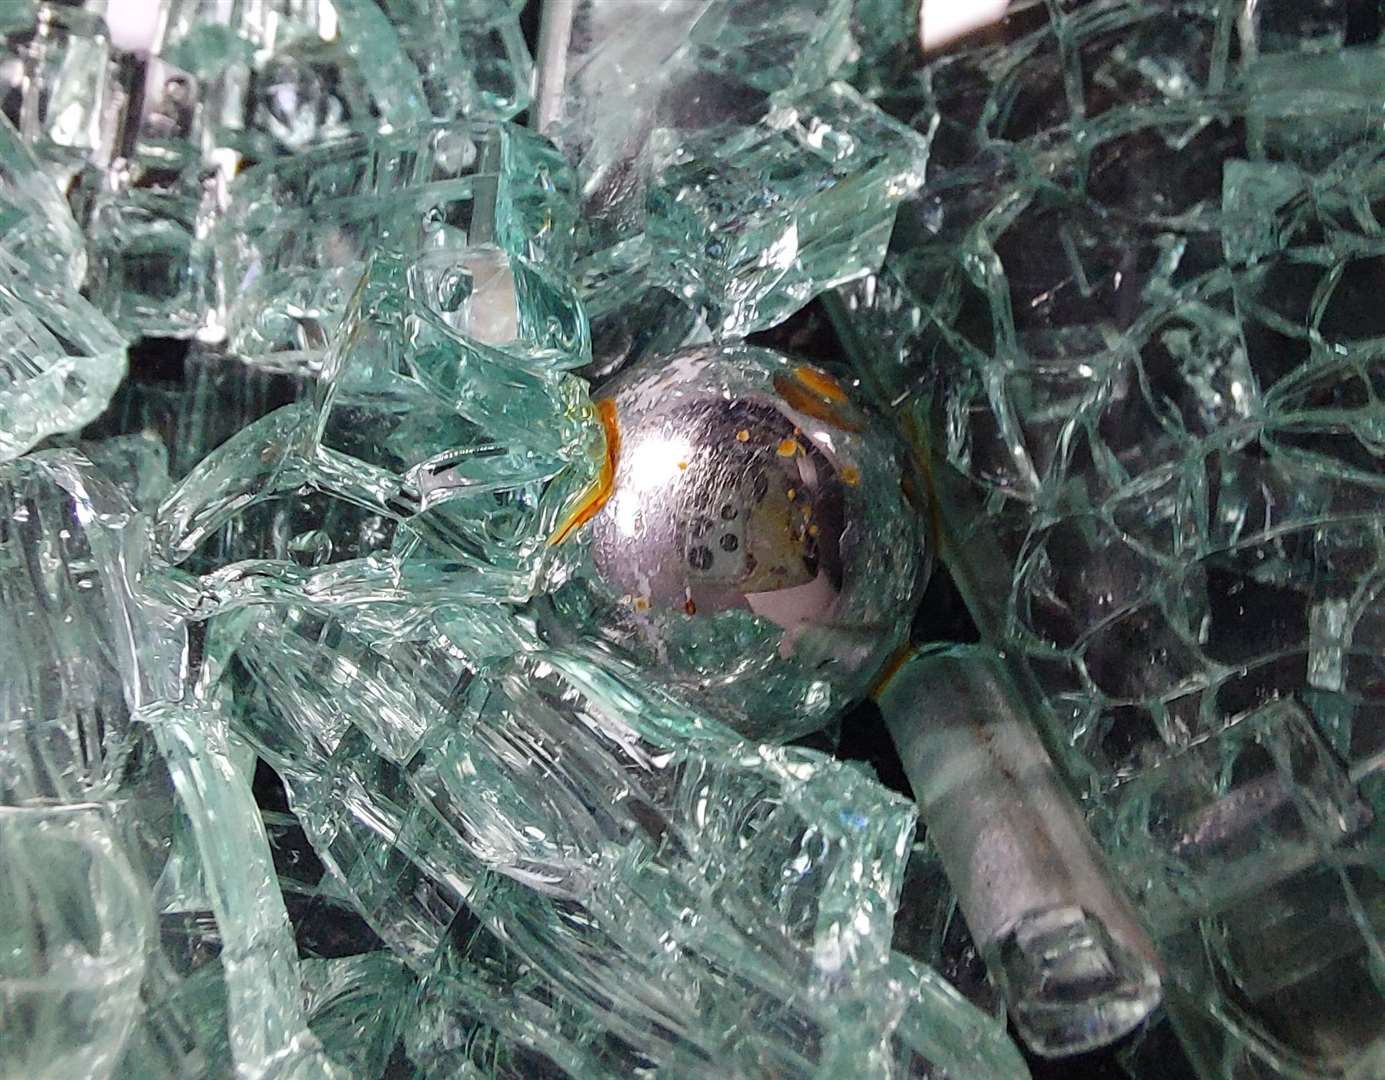 A 12mm ball bearing was found inside the vehicle. Picture: Helen Blanche